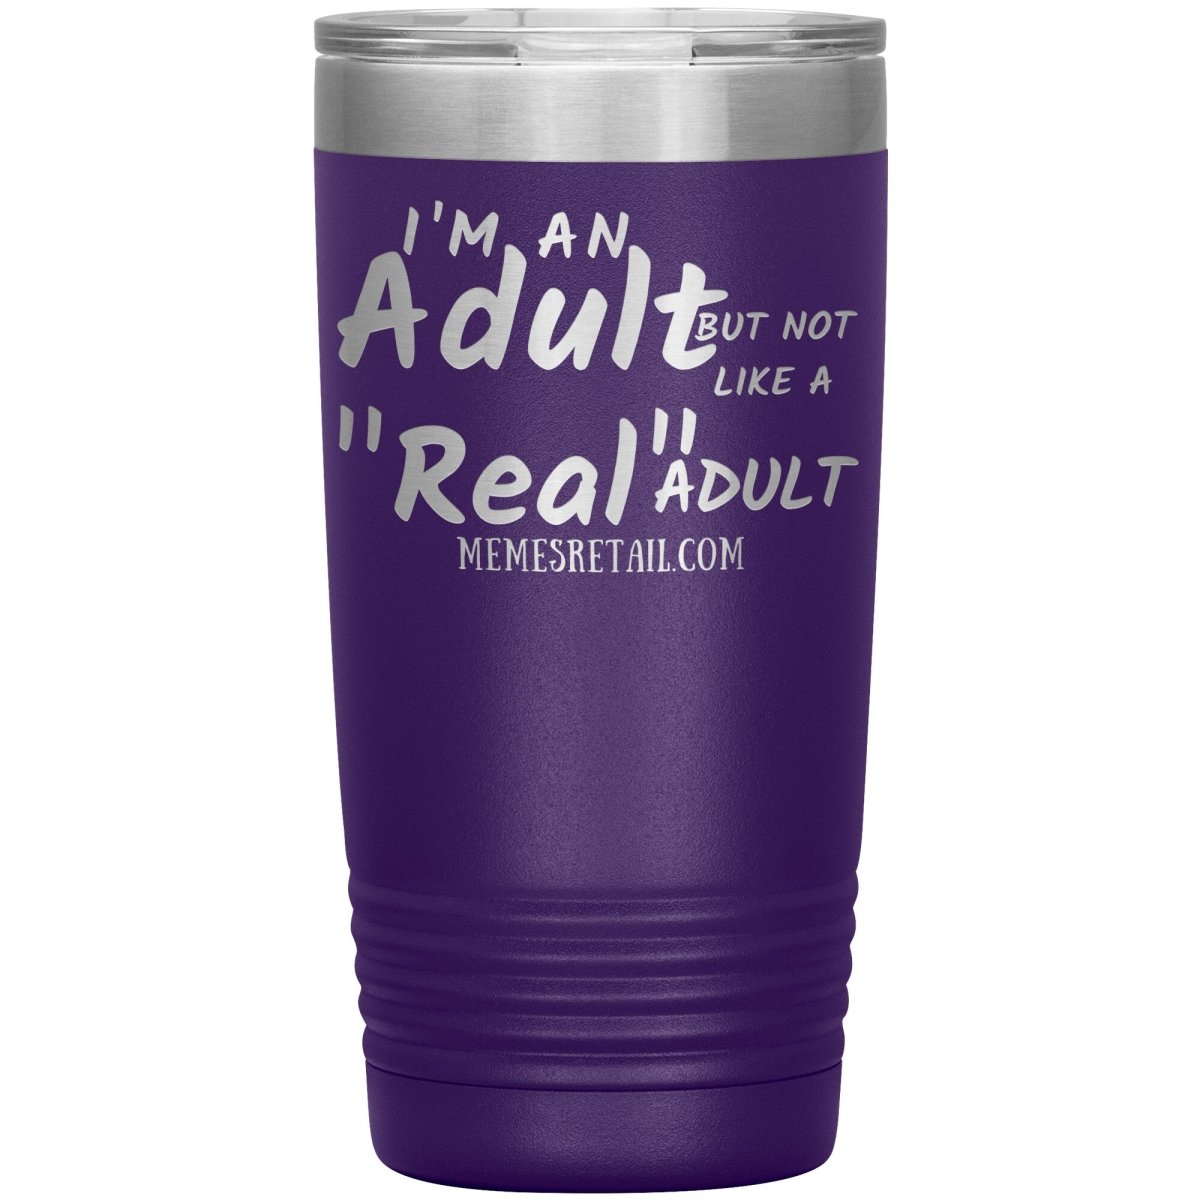 I'm an adult, but not like a "real" adult Tumblers, 20oz Insulated Tumbler / Purple - MemesRetail.com